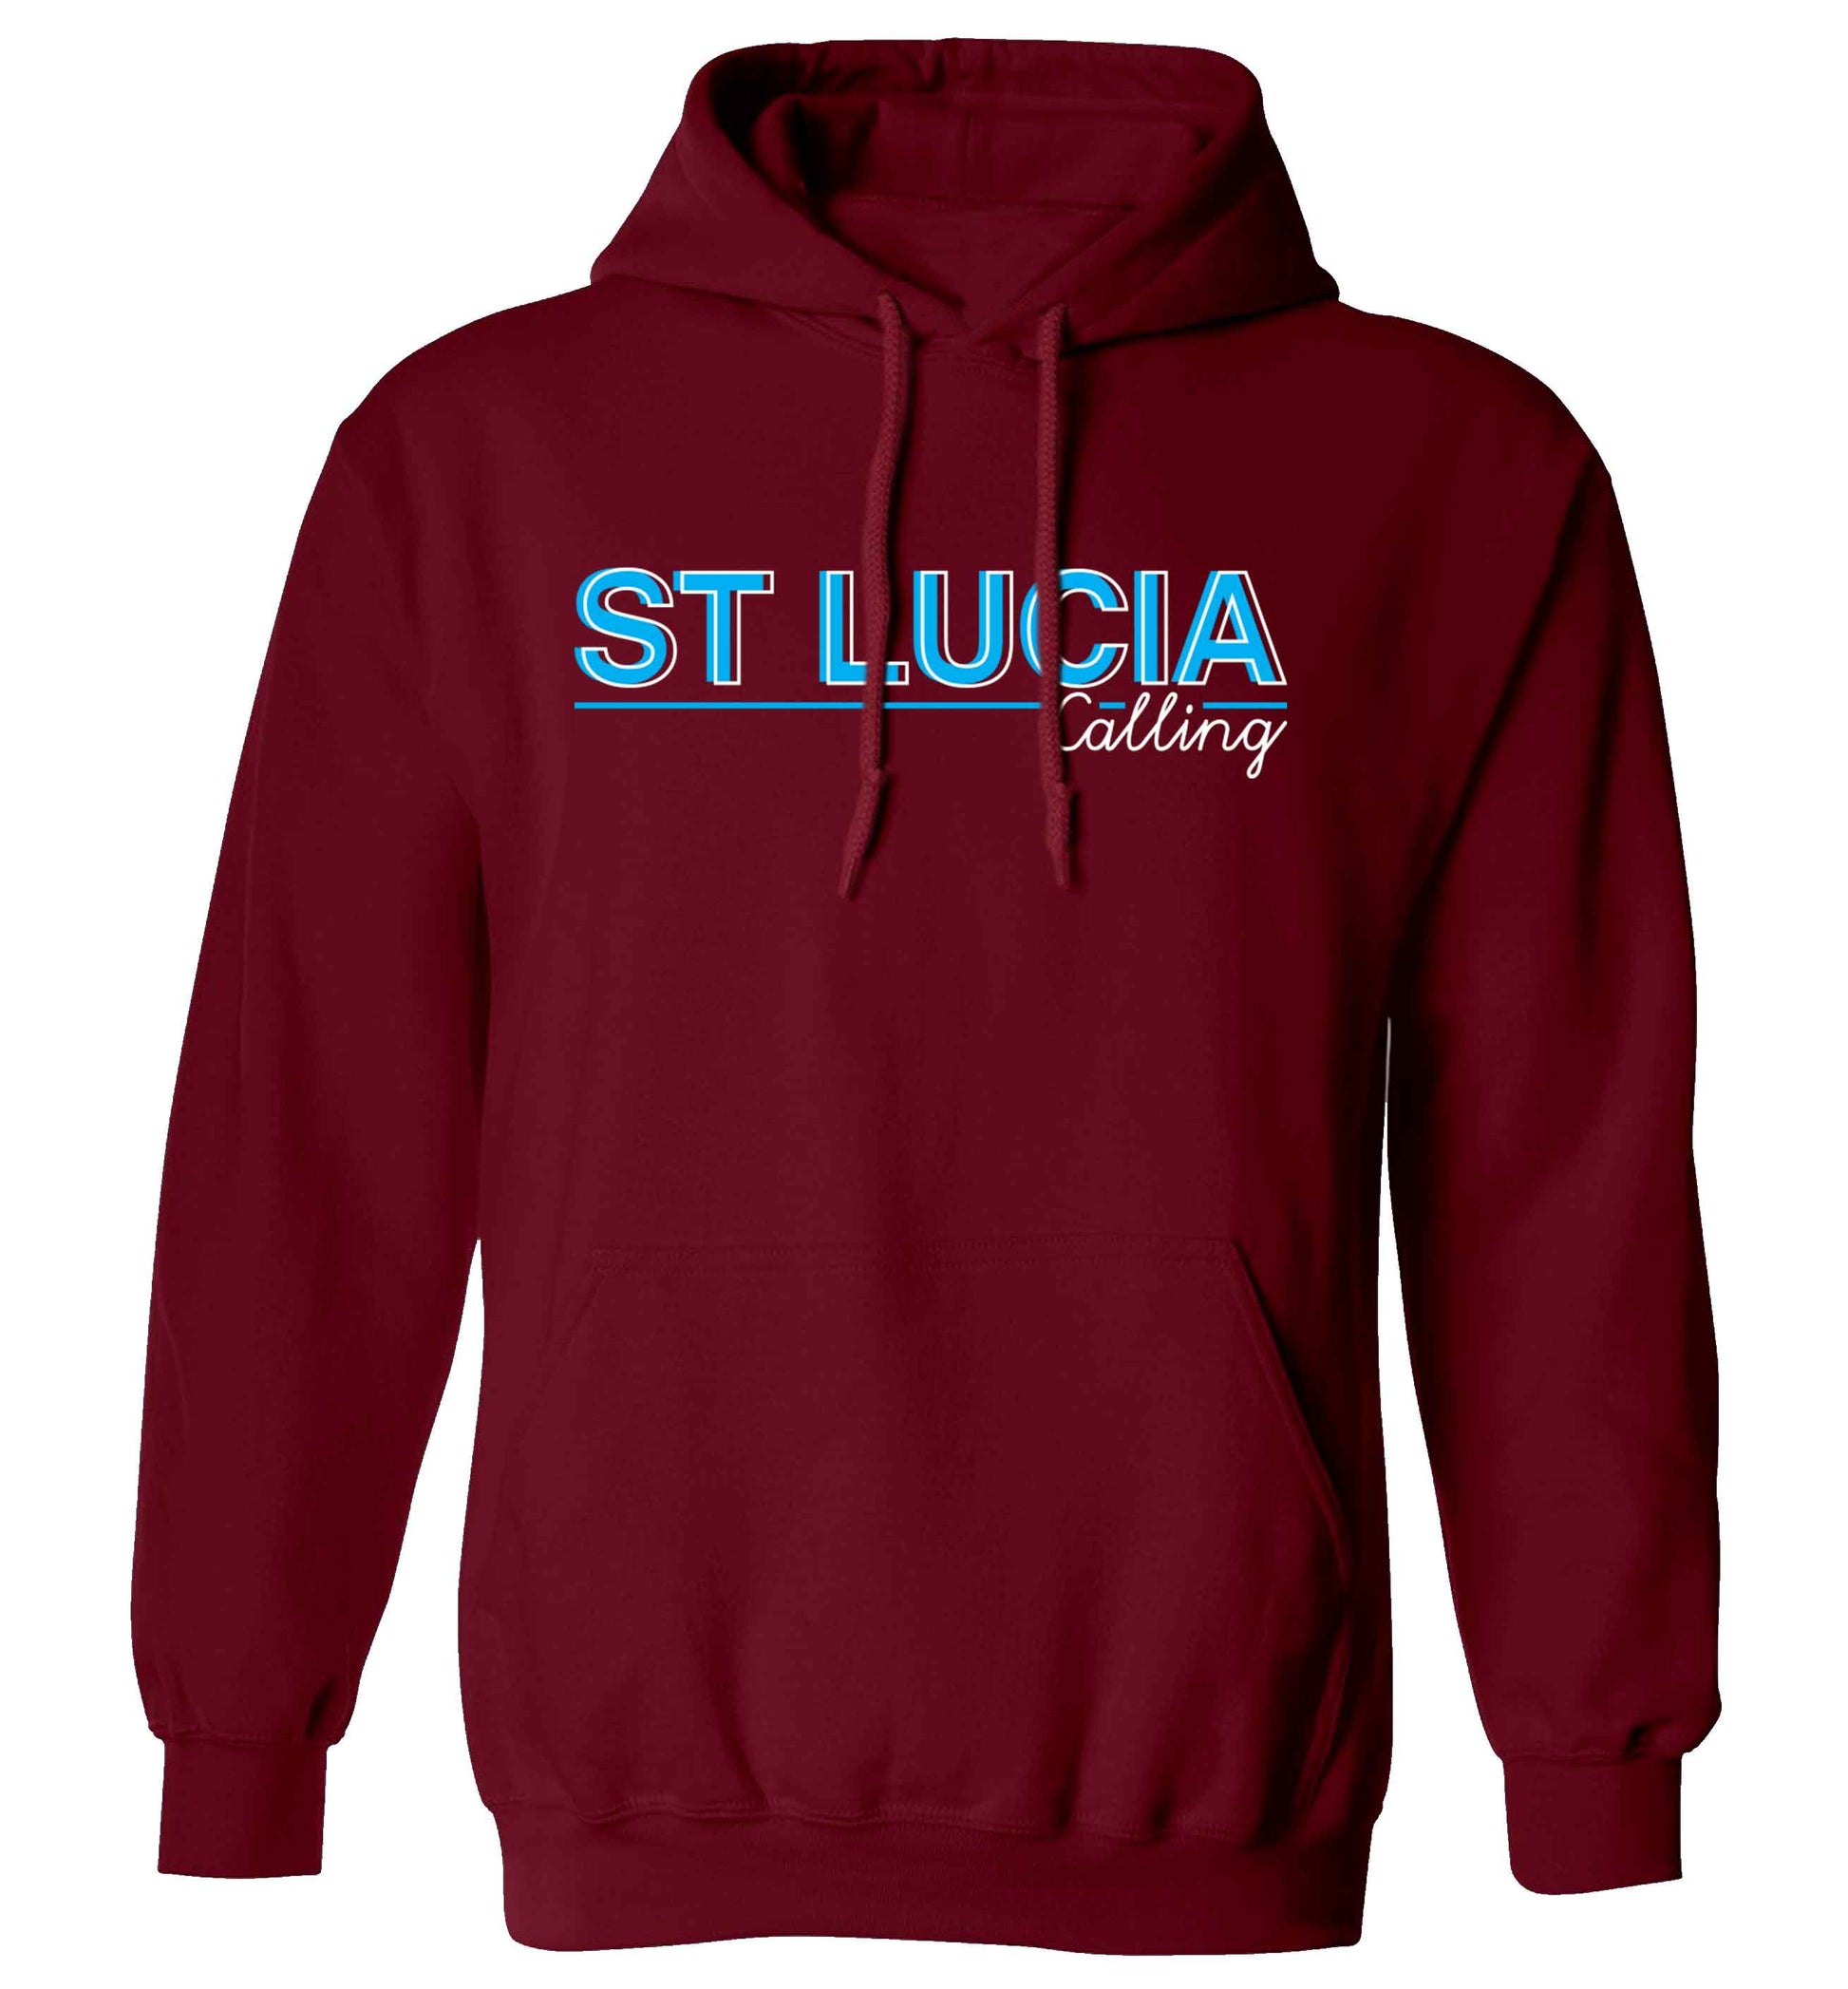 St Lucia calling adults unisex maroon hoodie 2XL